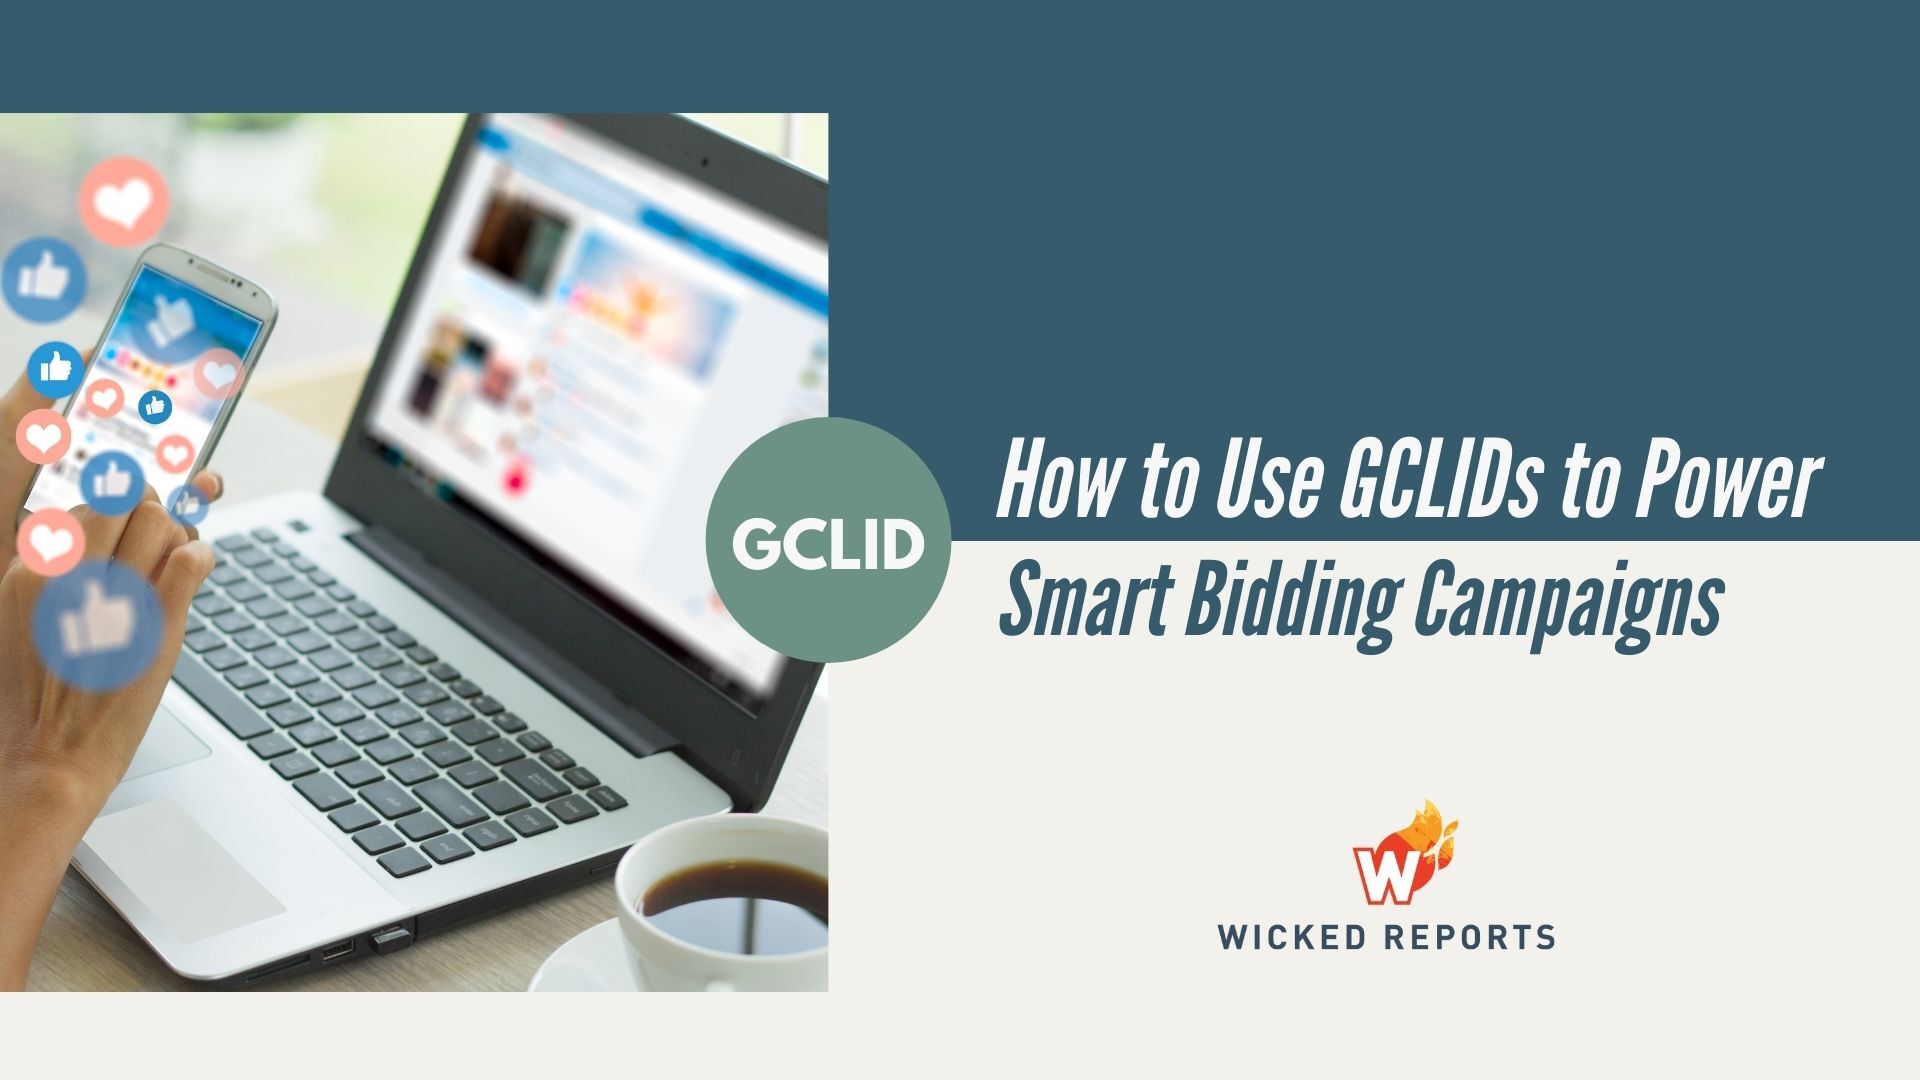 GCLIDs smart bidding campaigns wicked reports featured